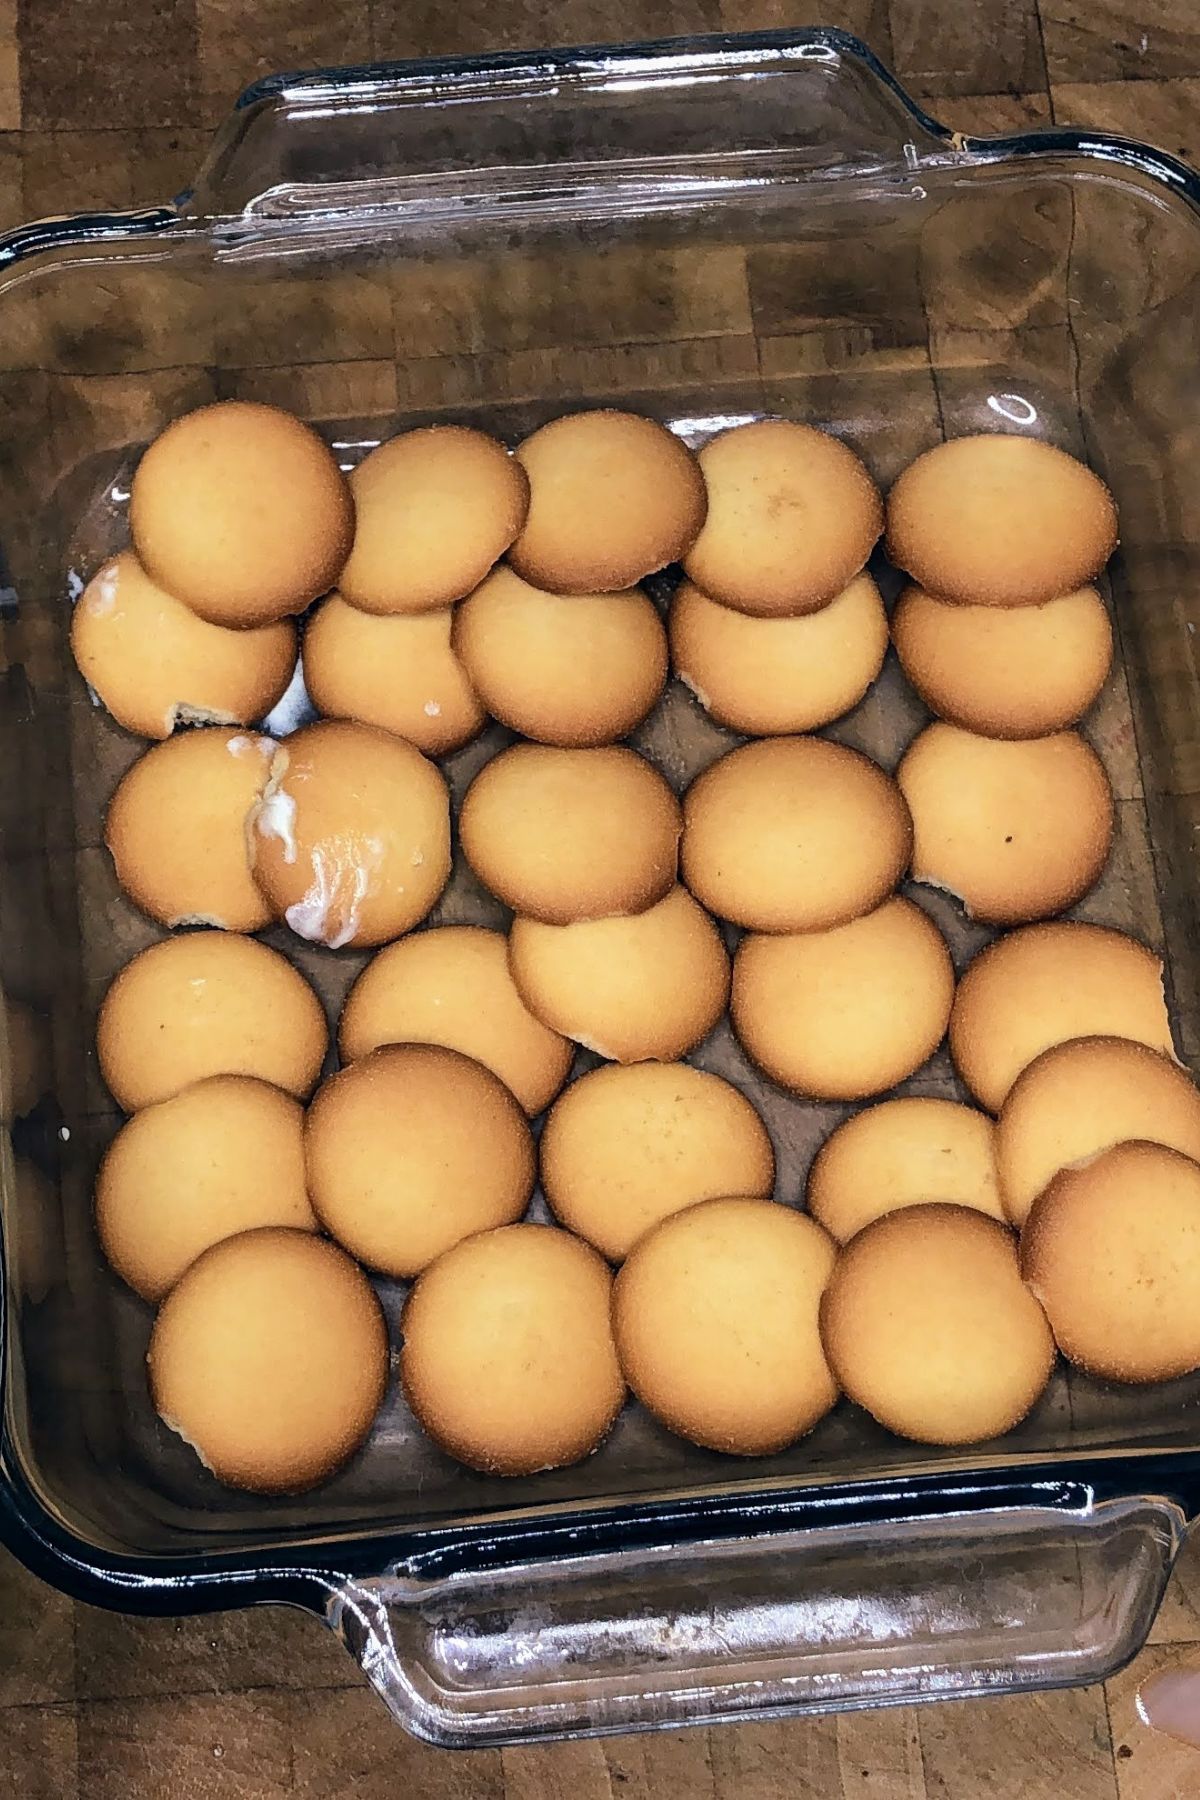 Nilla wafers in a single layer in a pan.